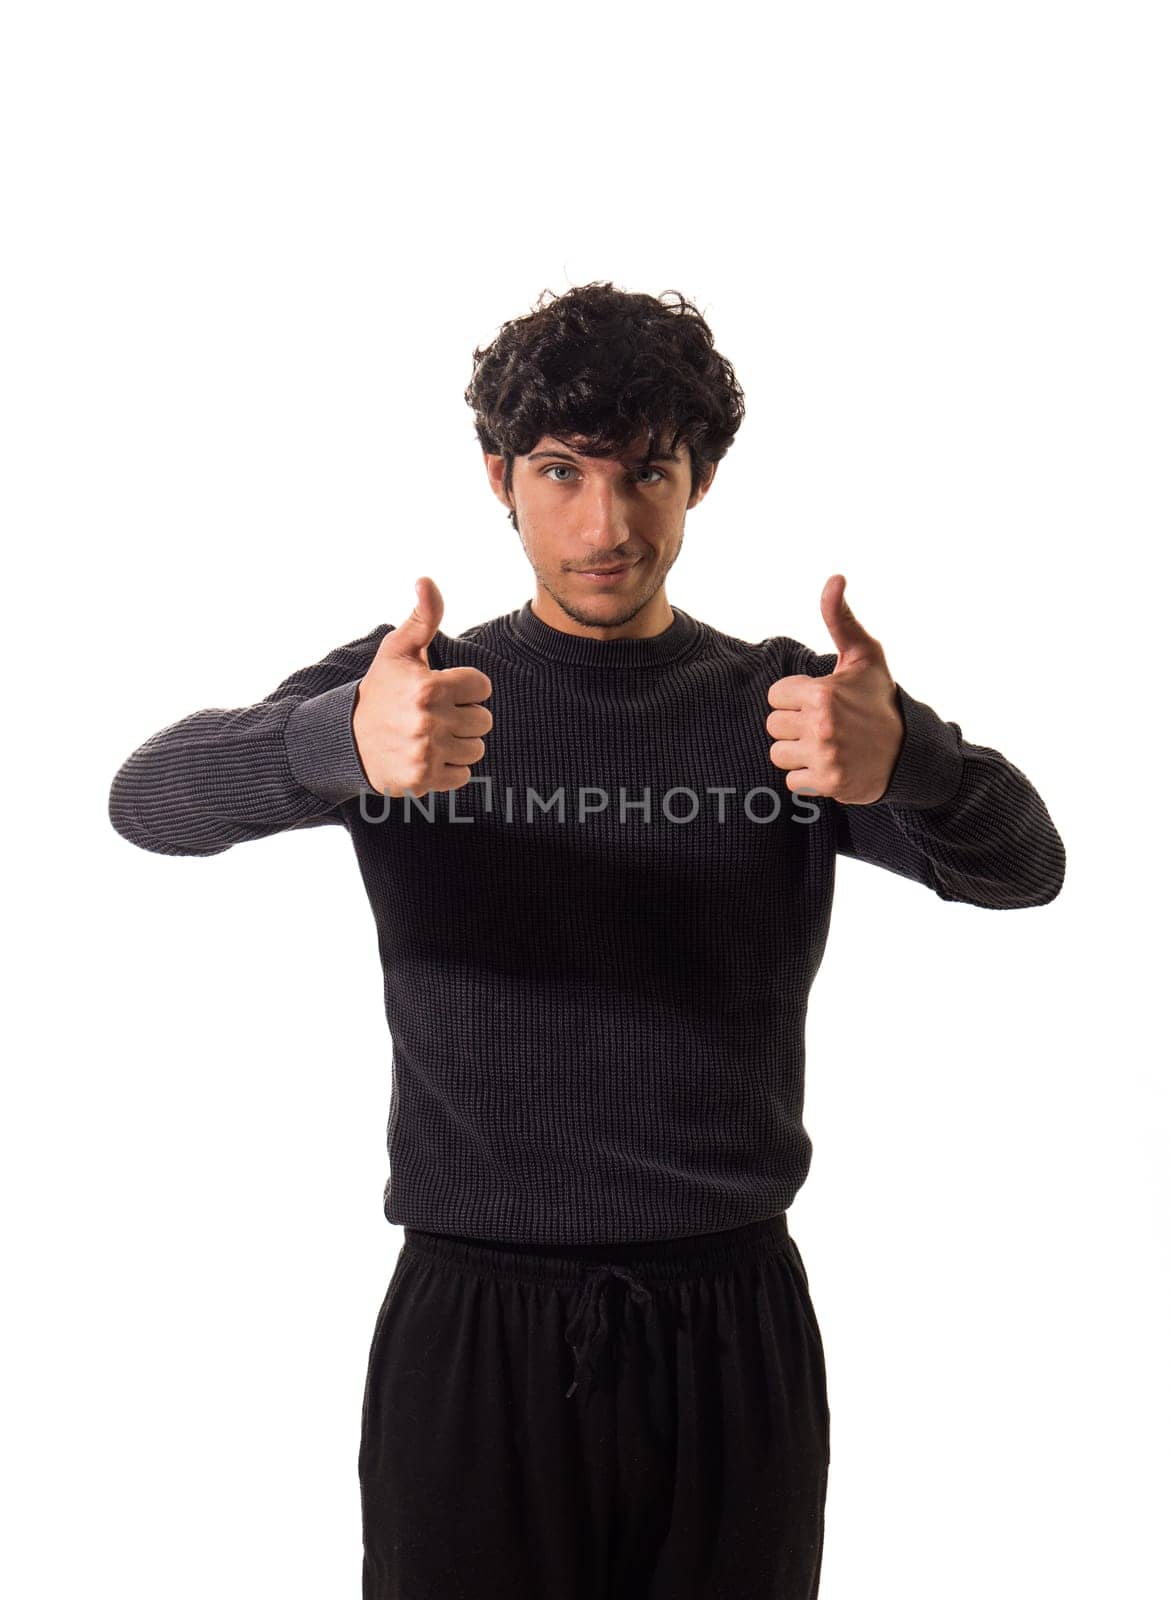 A Man in a Black Sweater Giving a Thumbs Up by artofphoto